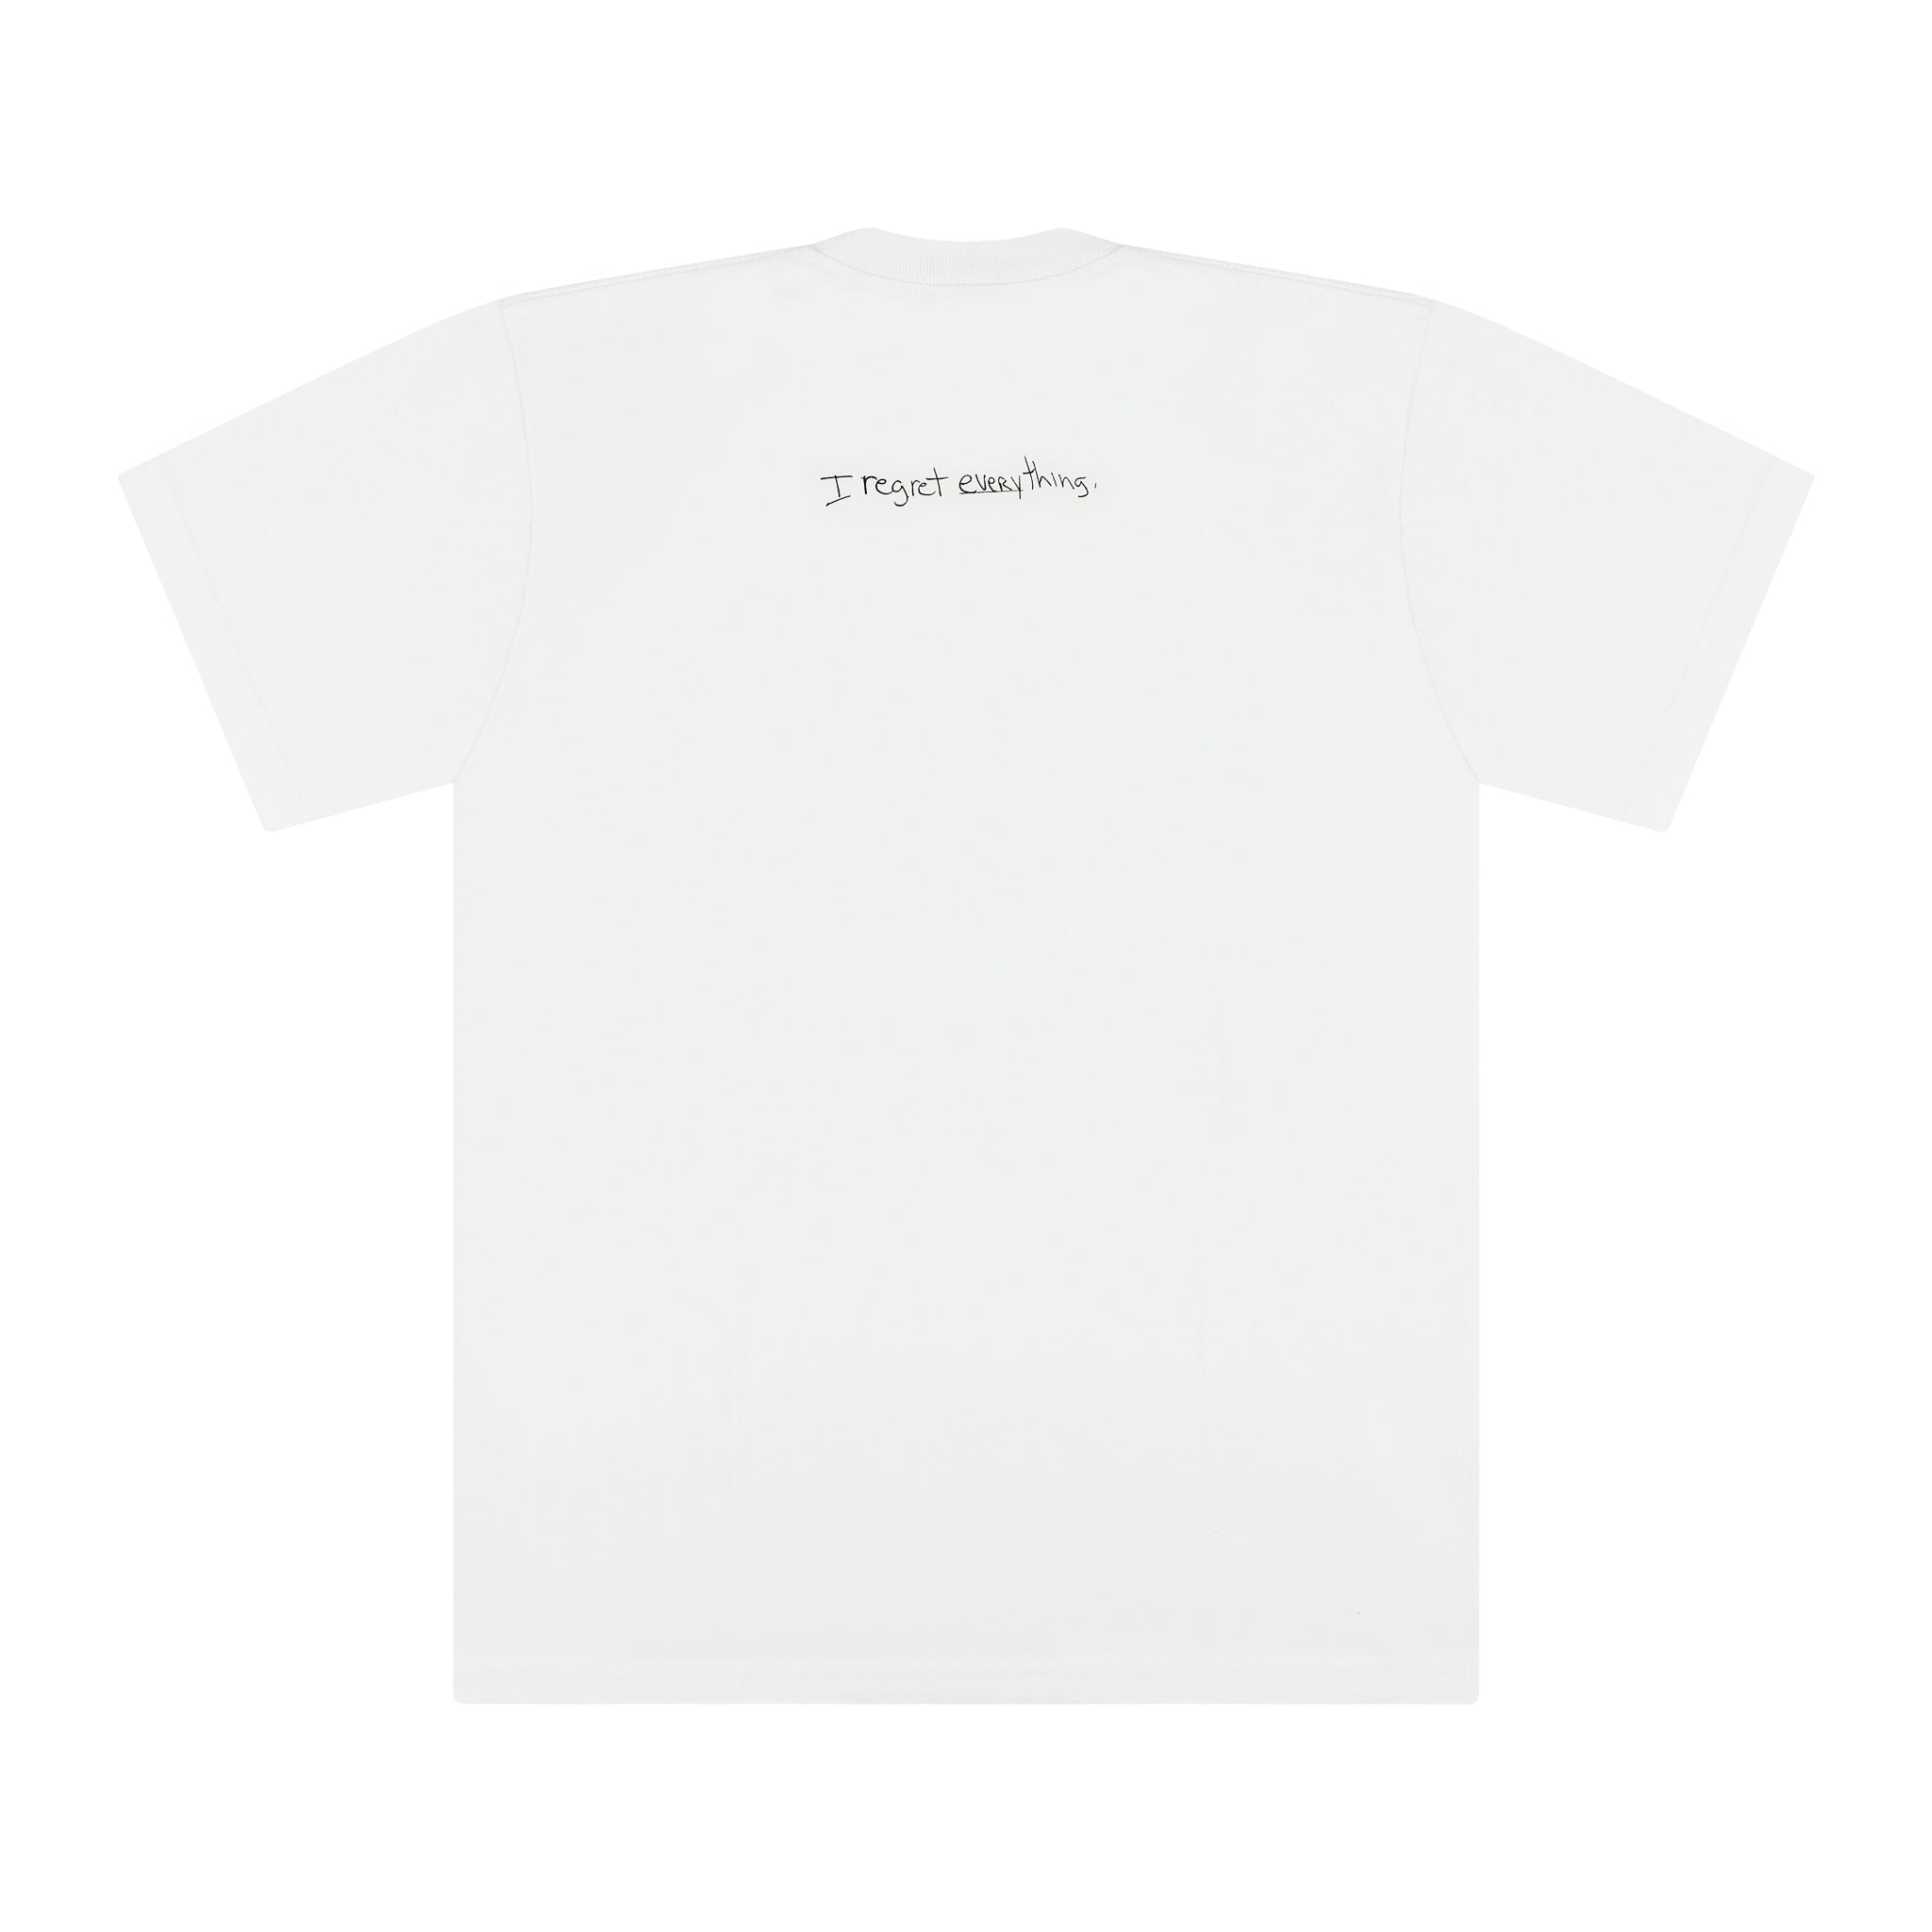 SUPREME MIKE HILL REGRETTER TEE